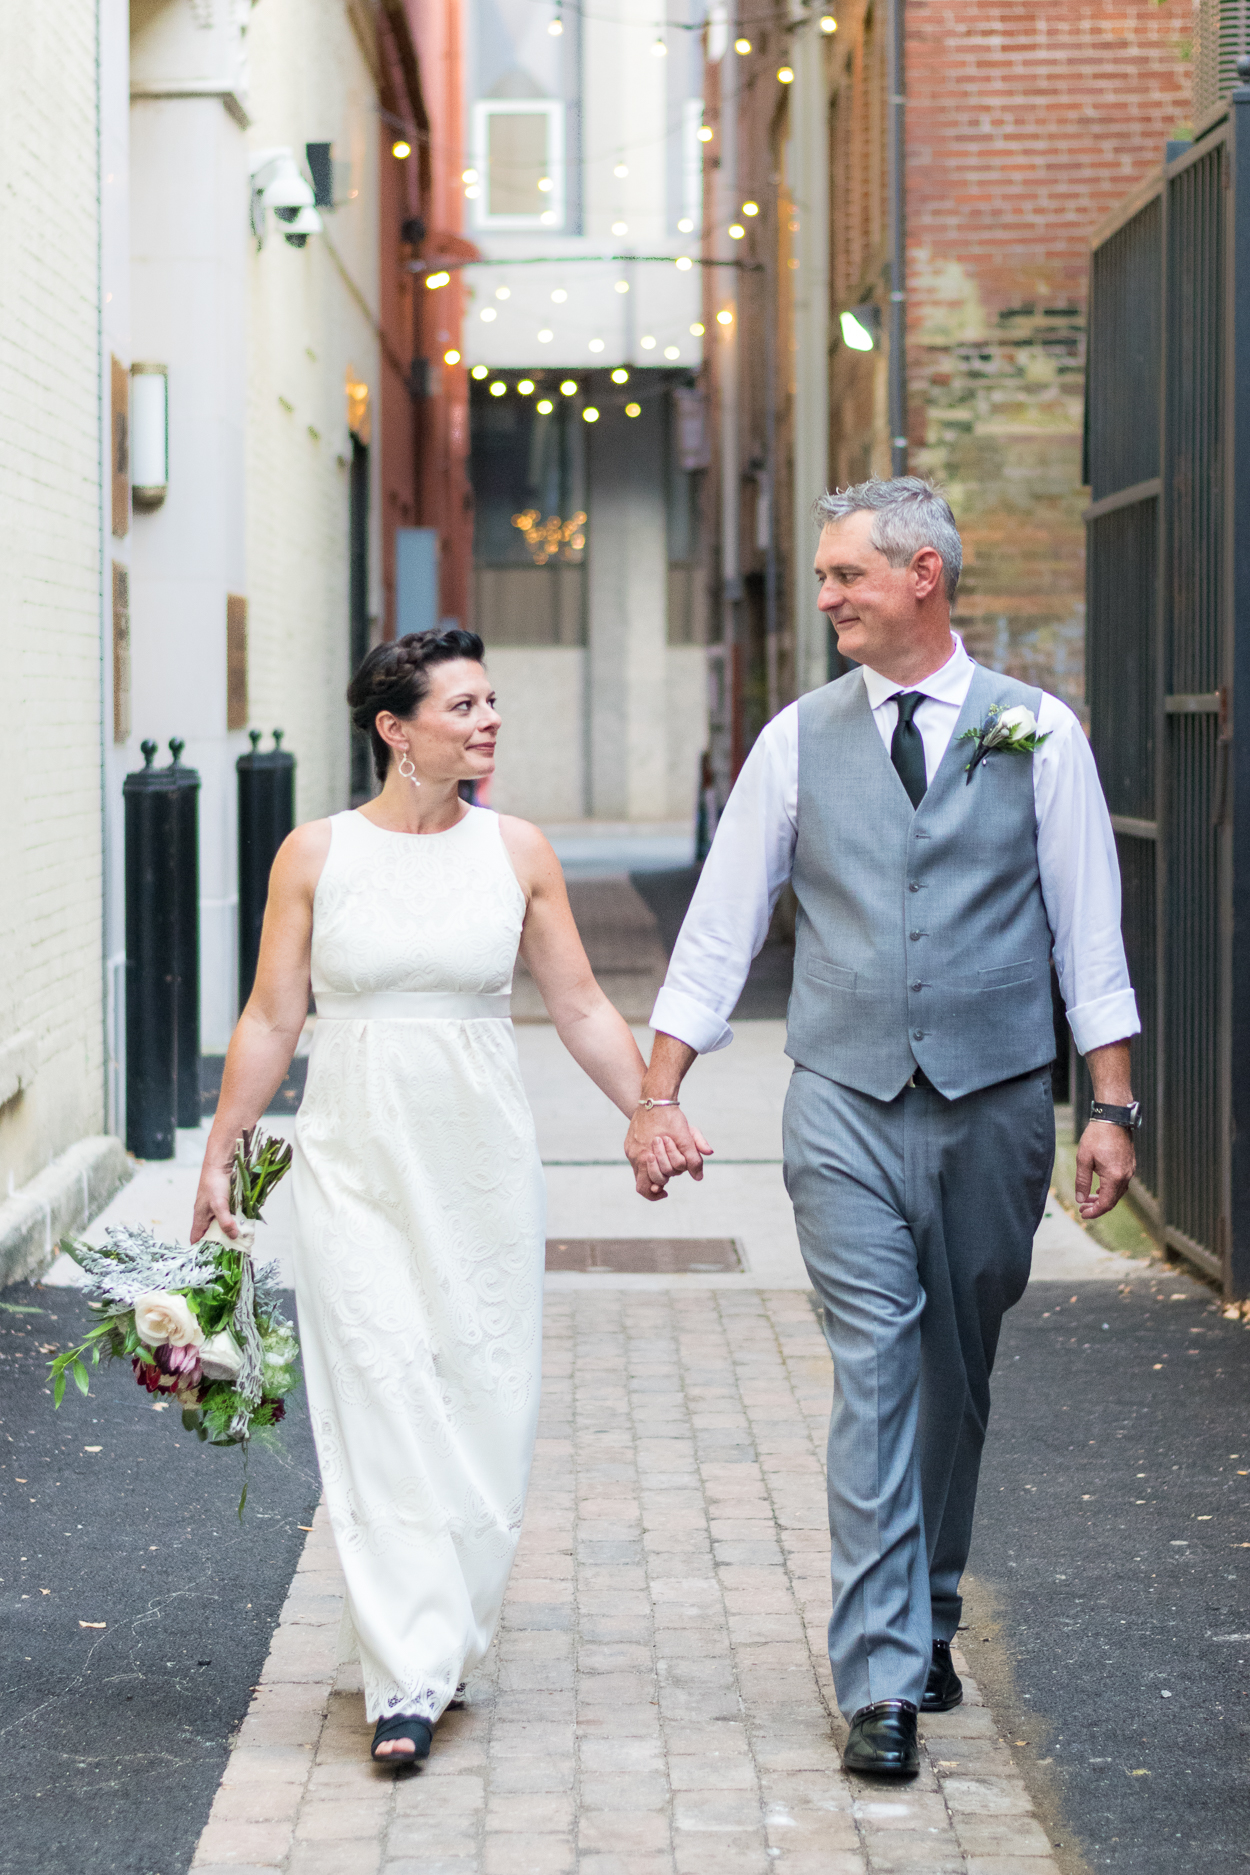 Bride and groom walk down Strong Alley after their Market Square wedding.